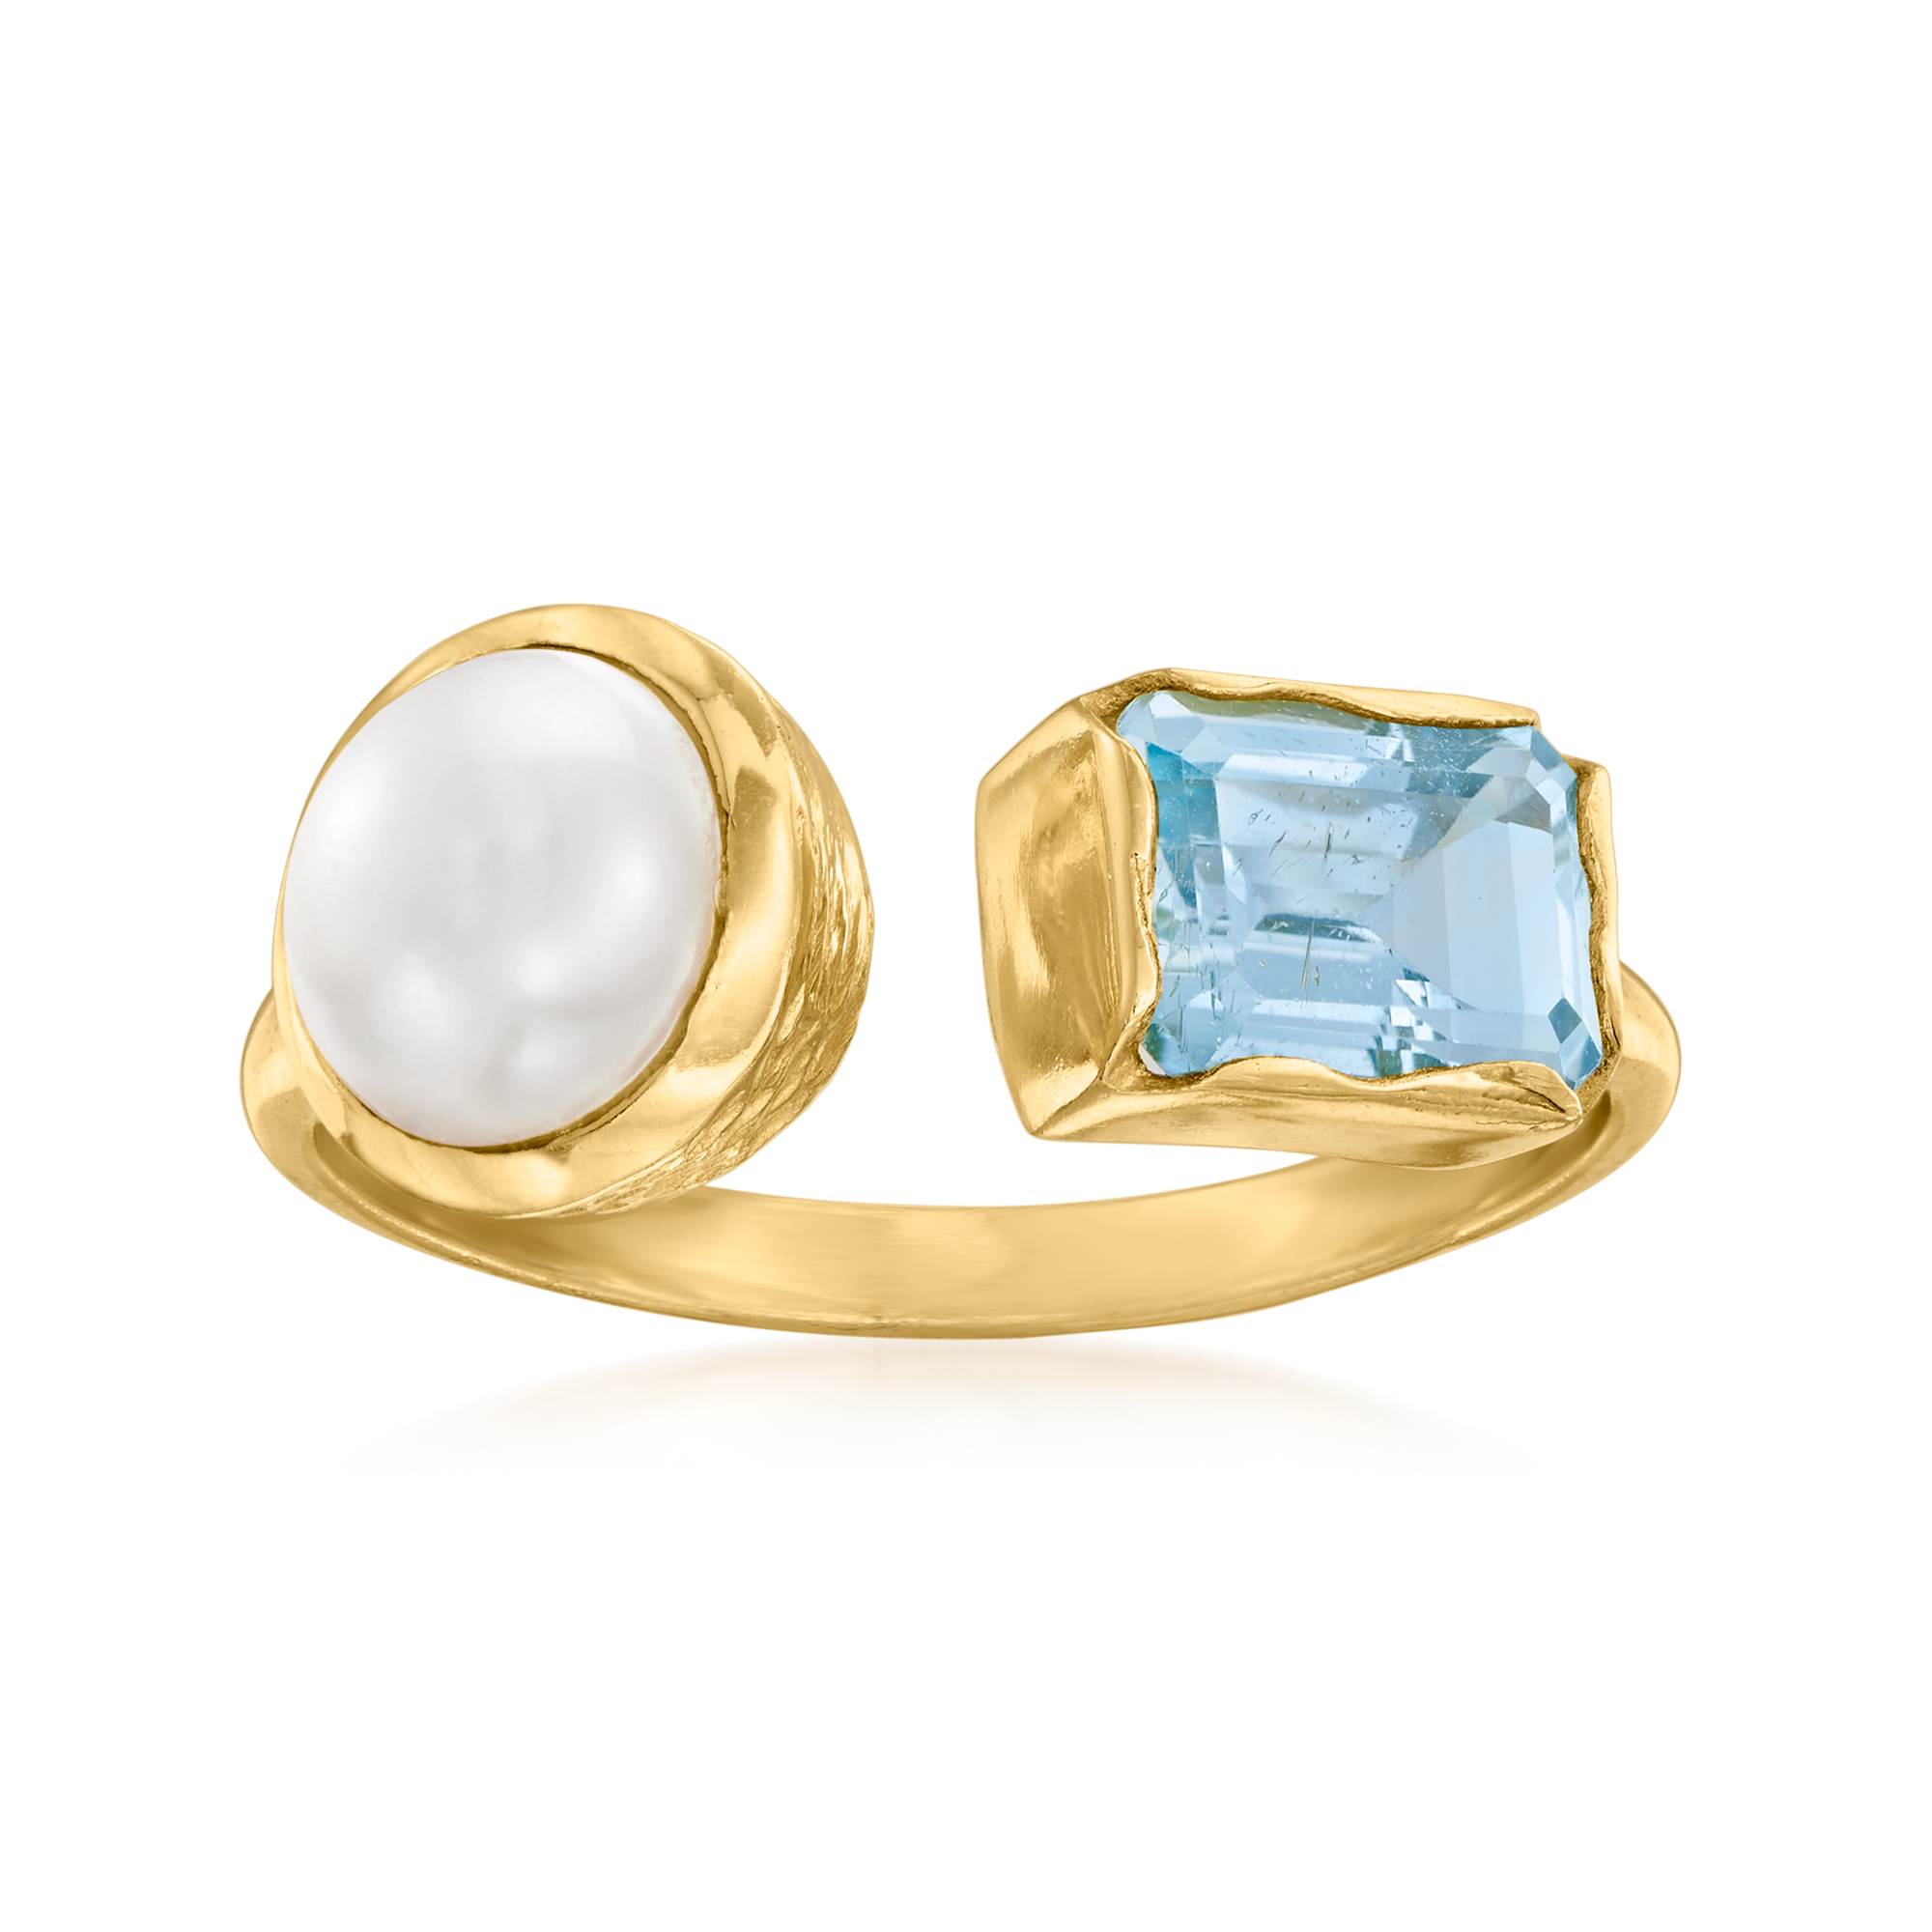 8-8.5mm Cultured Pearl and 1.40 Carat Sky Blue Topaz Ring in 18kt 